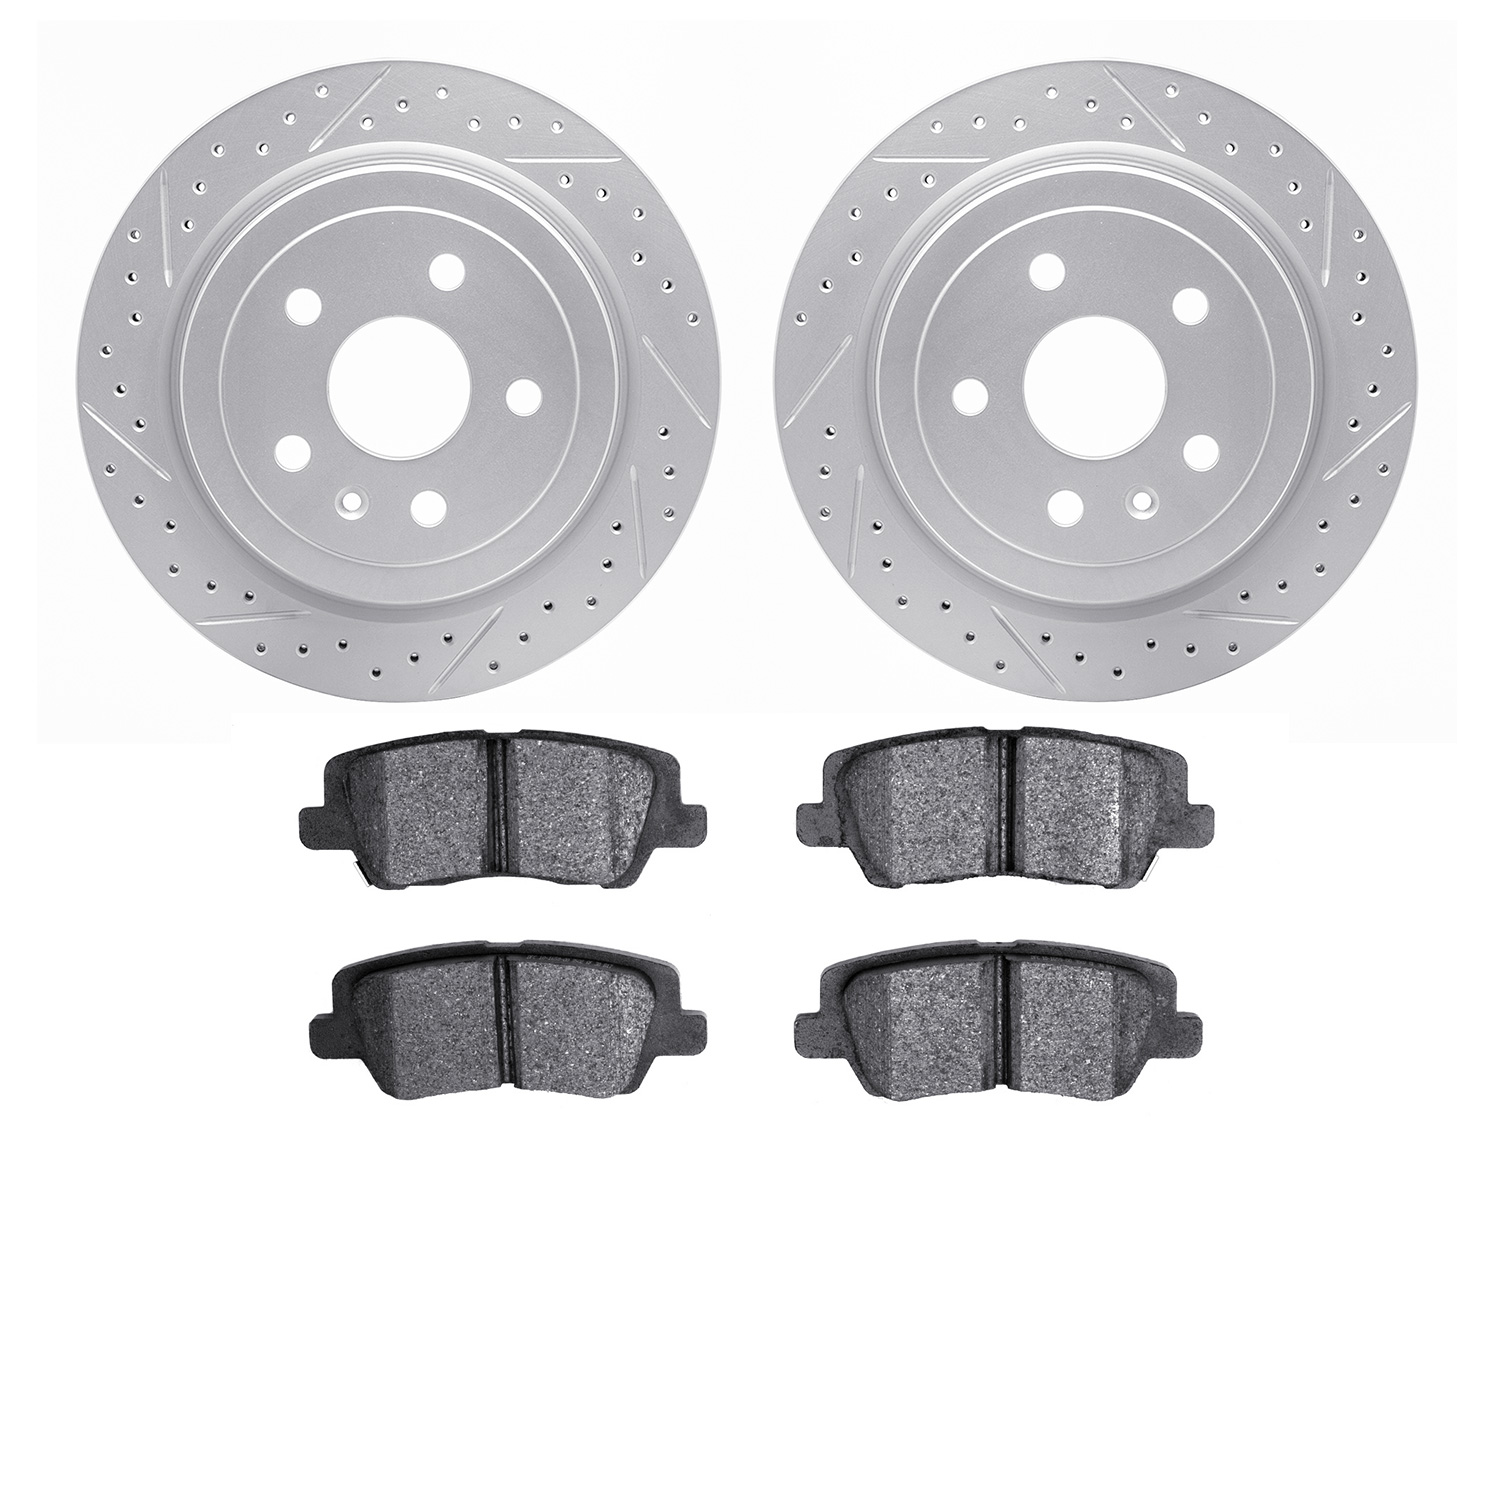 2502-46025 Geoperformance Drilled/Slotted Rotors w/5000 Advanced Brake Pads Kit, 2014-2019 GM, Position: Rear